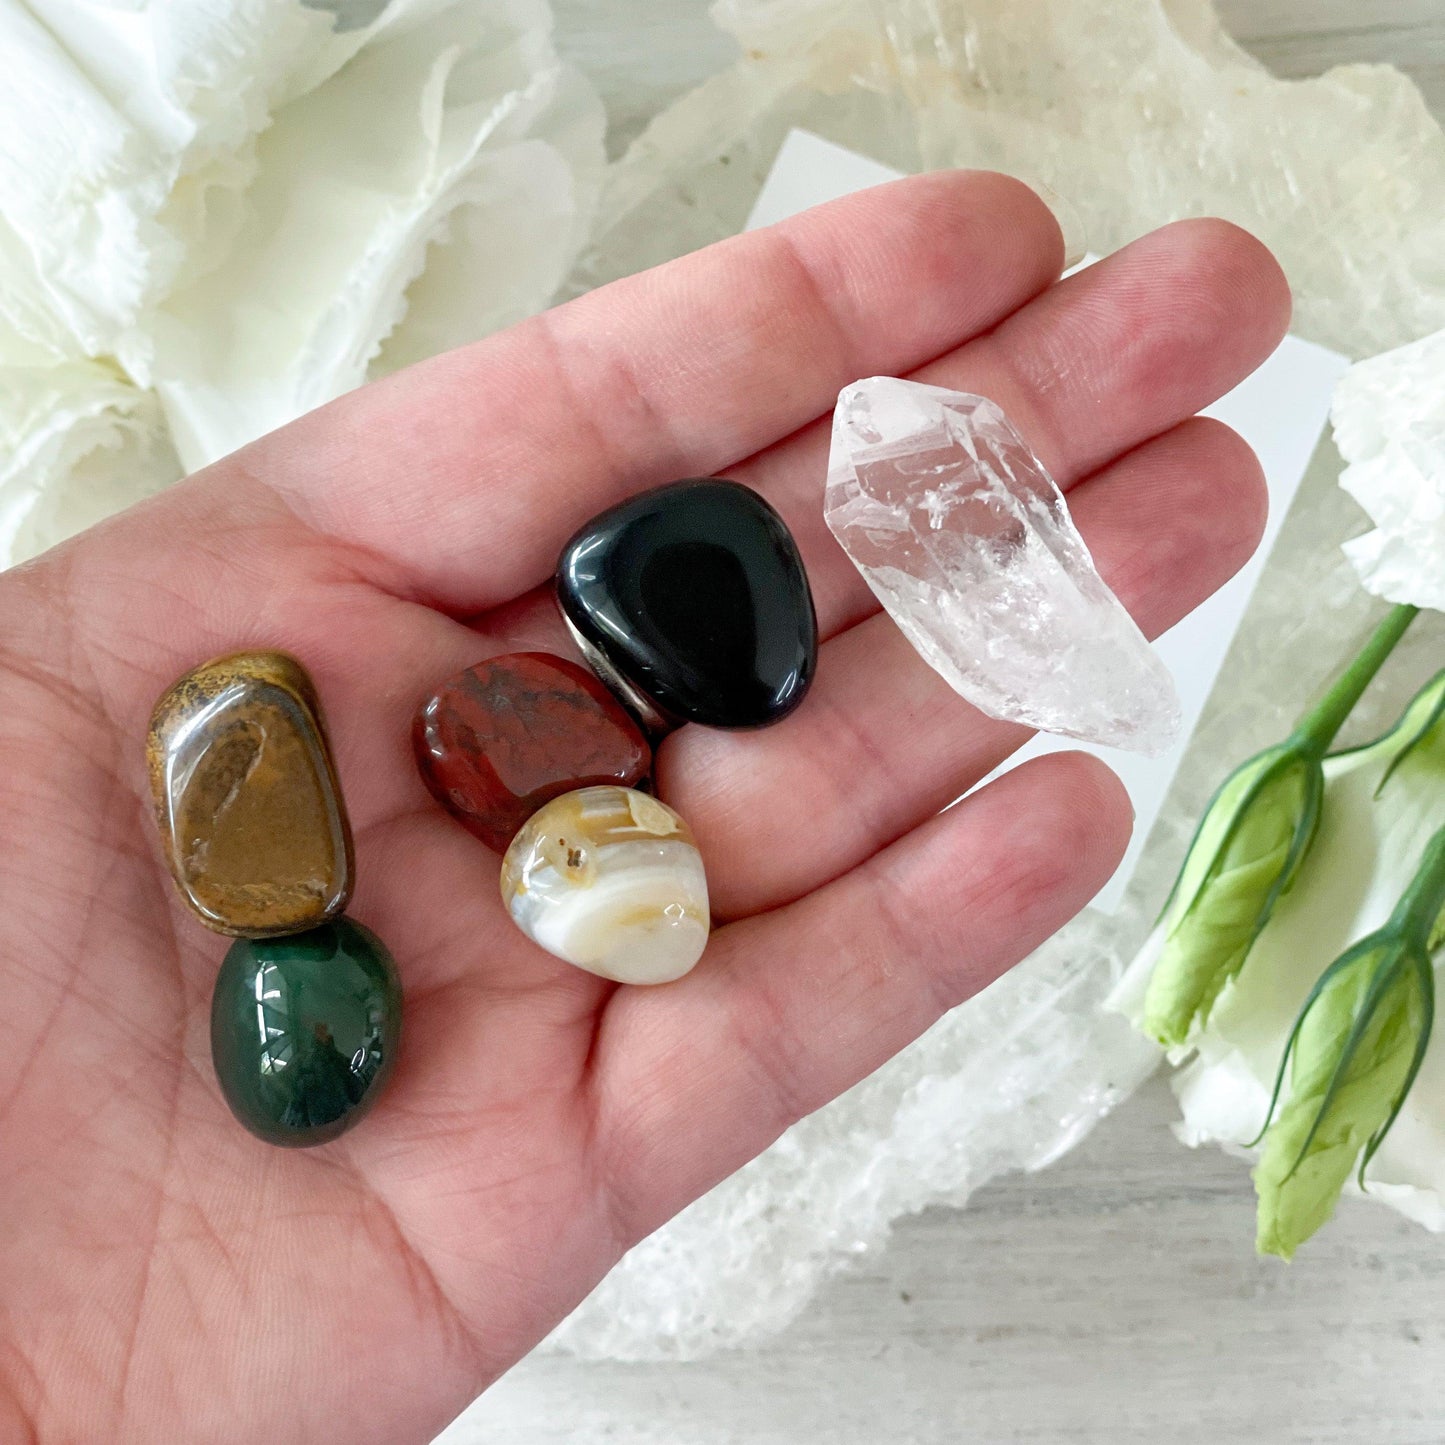 Protection Crystal Kit-Happily Zen